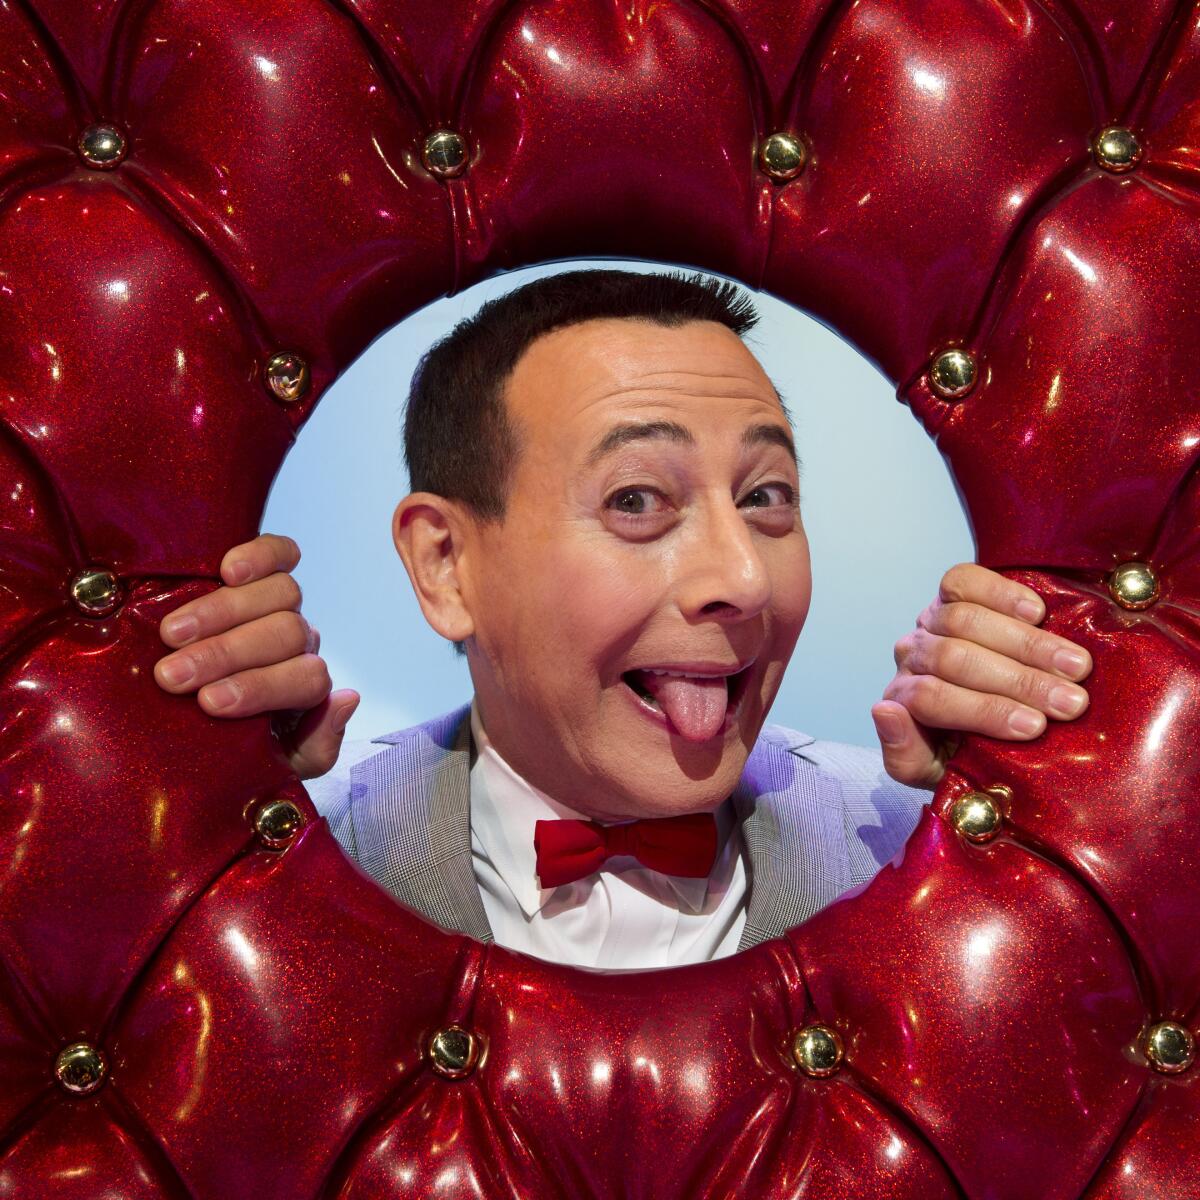 Paul Reubens sticks out his tongue while poking his head and hands through a hole in an upholstered red donut